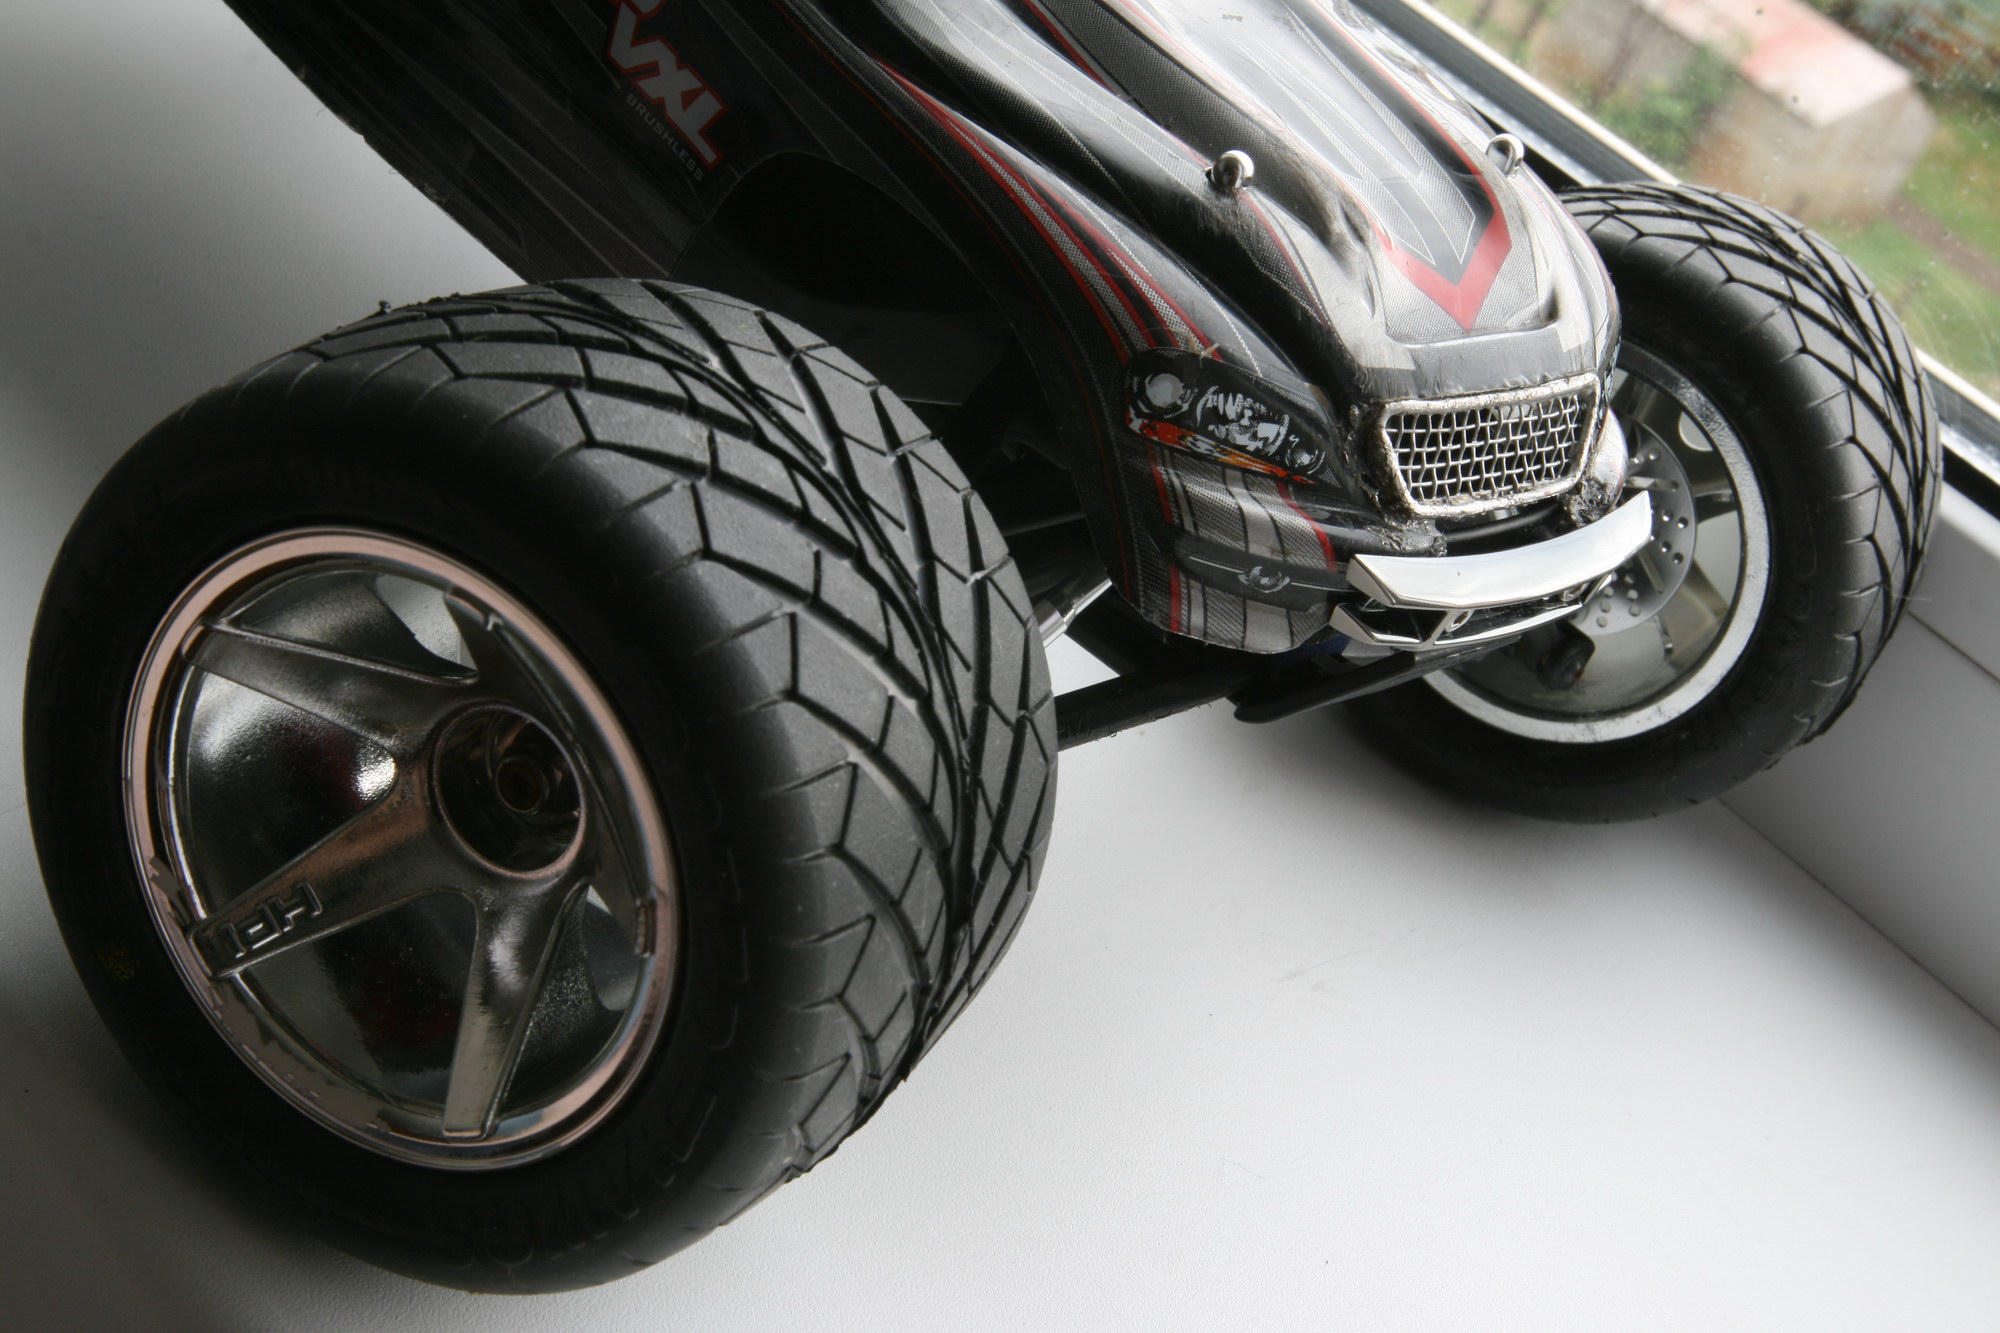 Tires And Rims: E Revo Tires And Rims